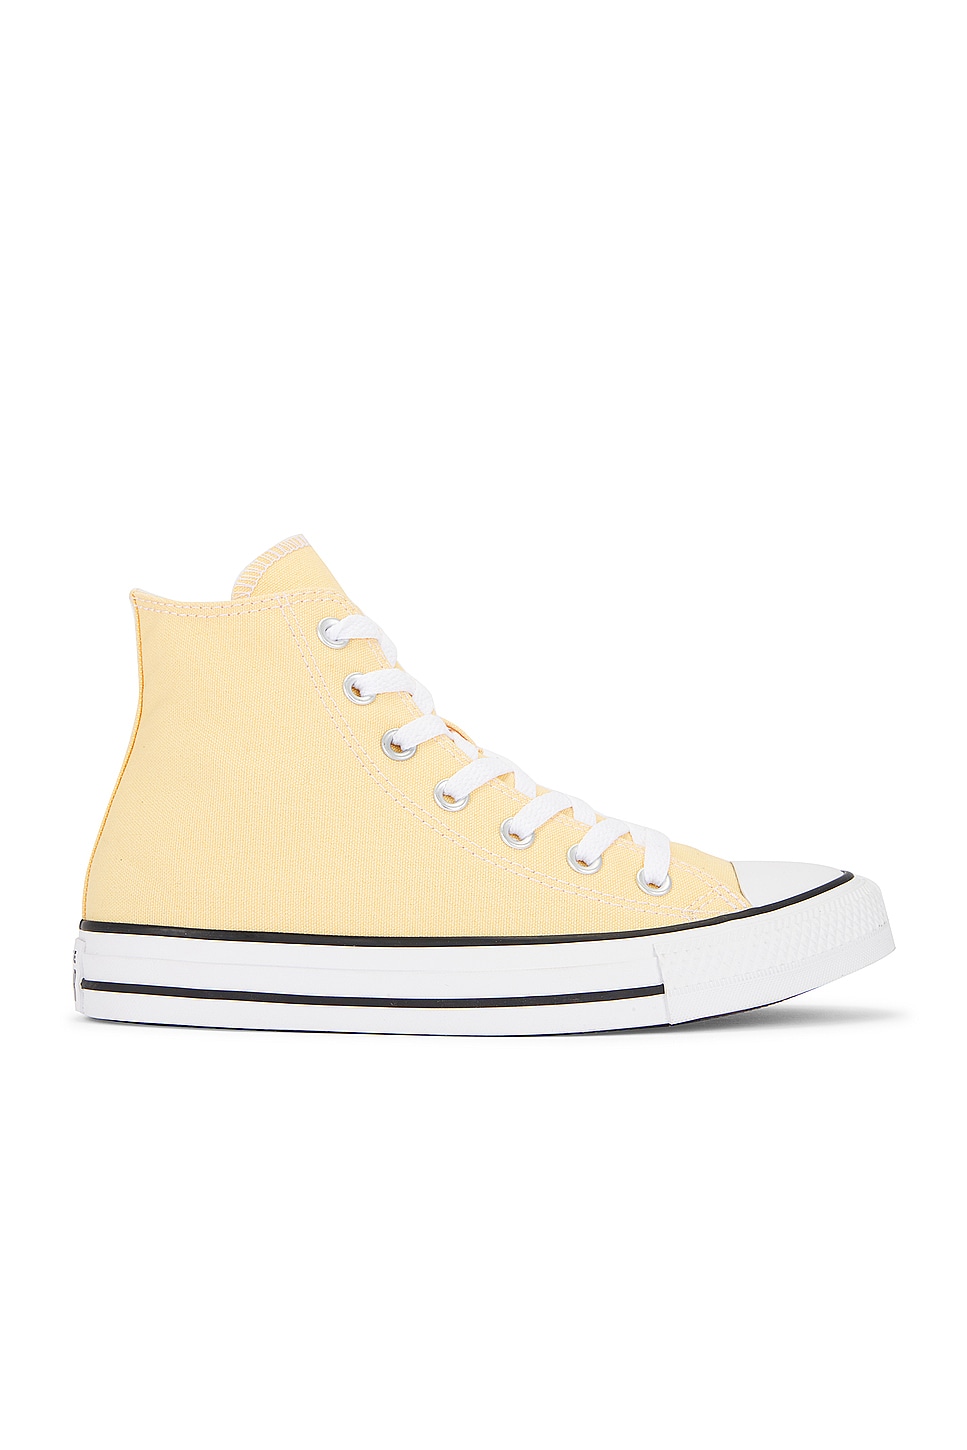 Image 1 of Converse Chuck Taylor All Star in Afternoon Sun